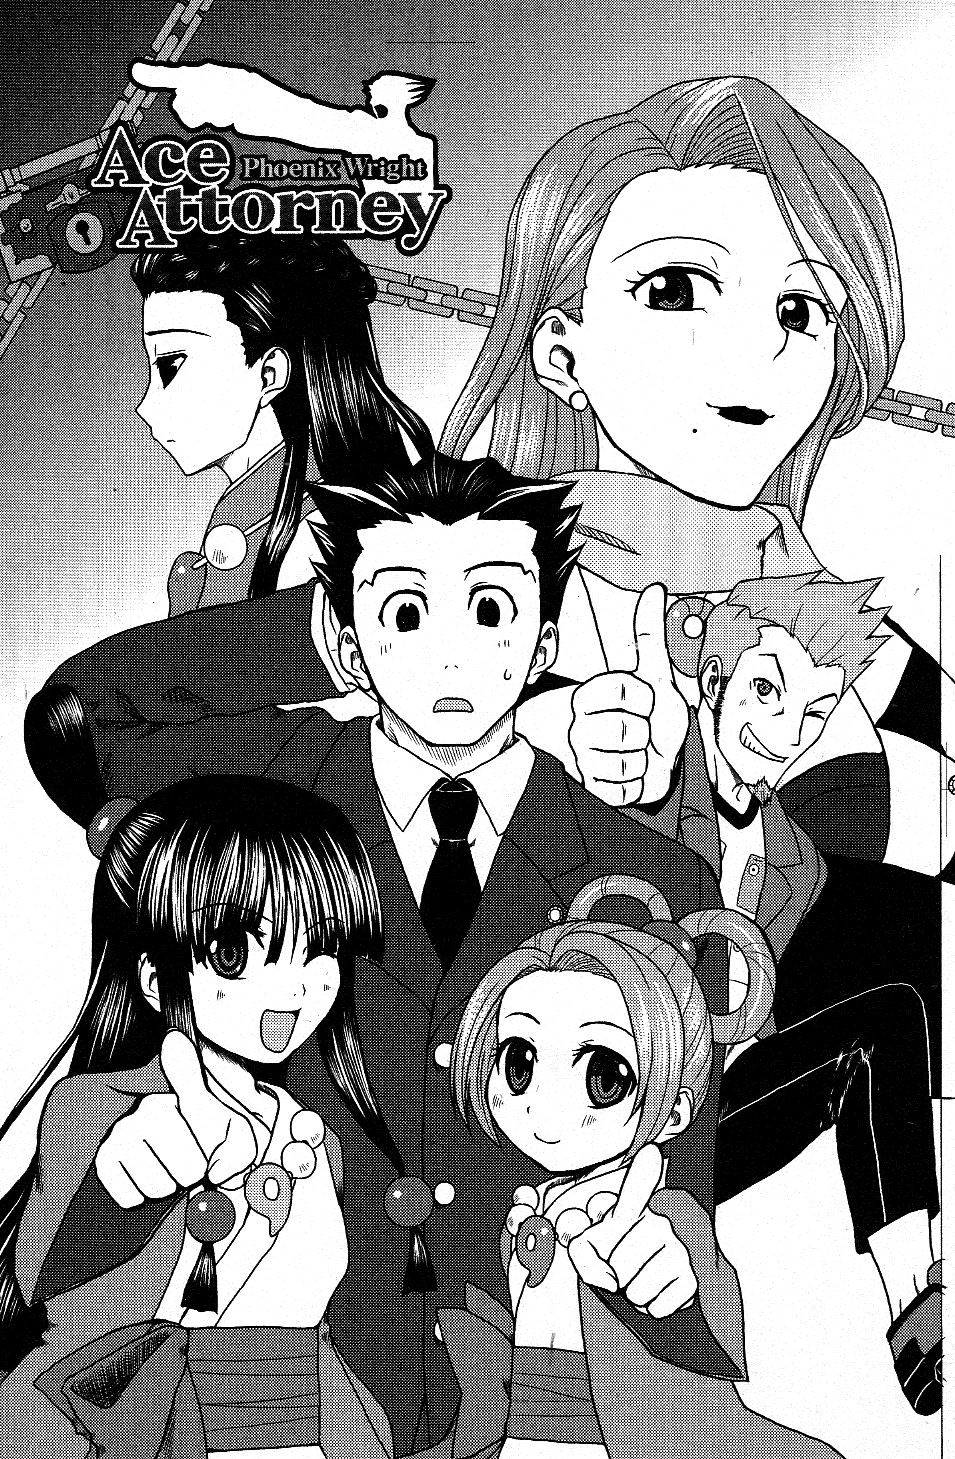 Phoenix Wright: Ace Attorney - Official Casebook Vol.1 Chapter 9: Turnabout Kitten - By Natsu Otono - Picture 1